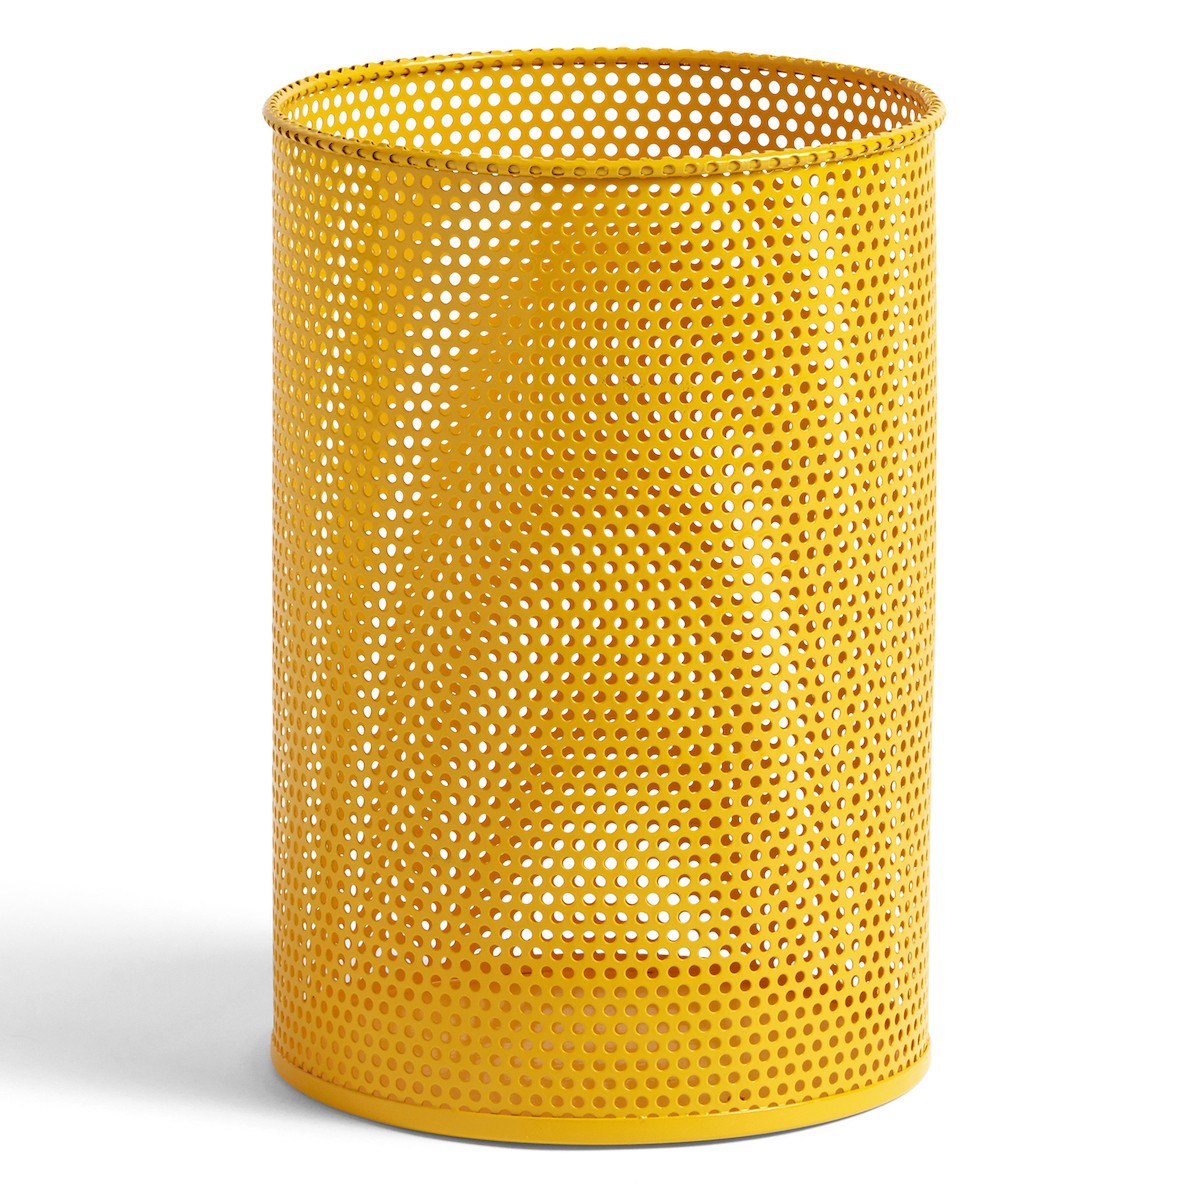 SOLD OUT - H37 x Ø25 cm - jaune - Perforated Bin M